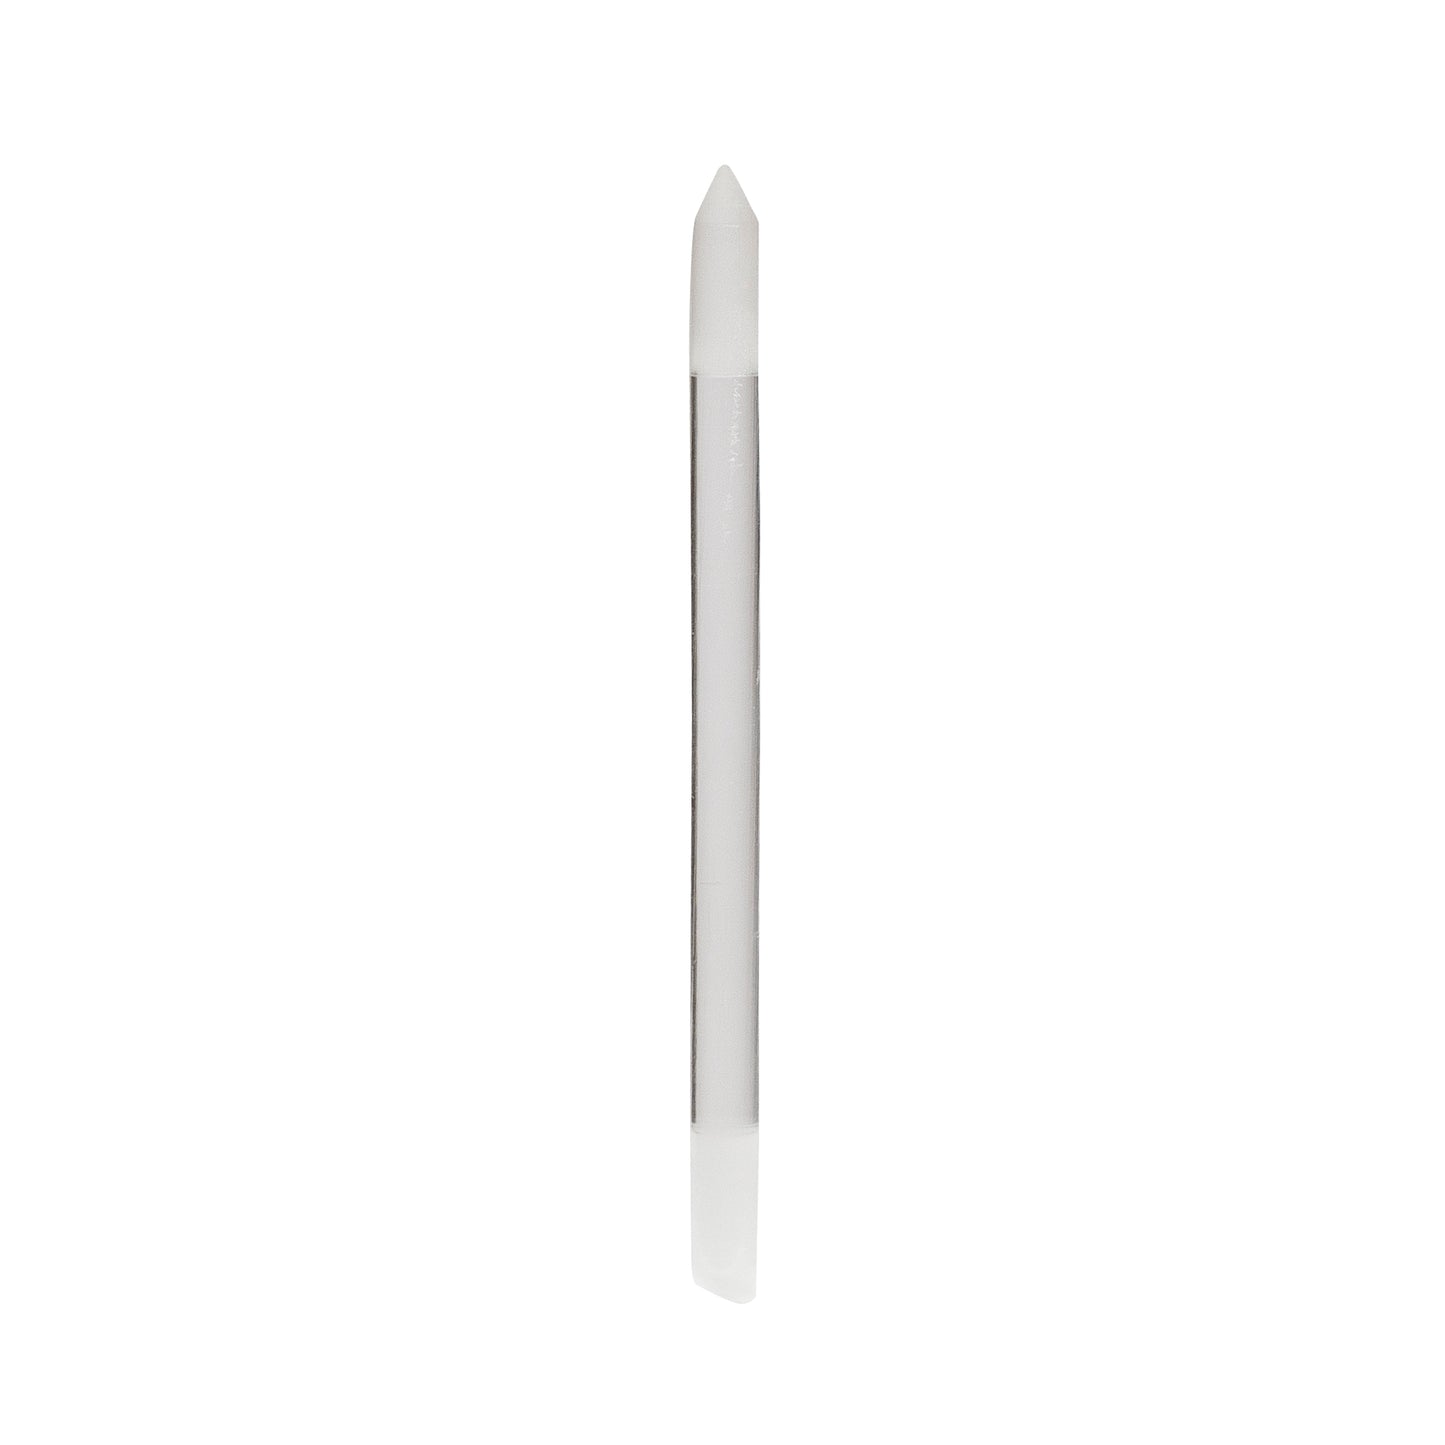 Primary Image of Glass Cuticle Remover